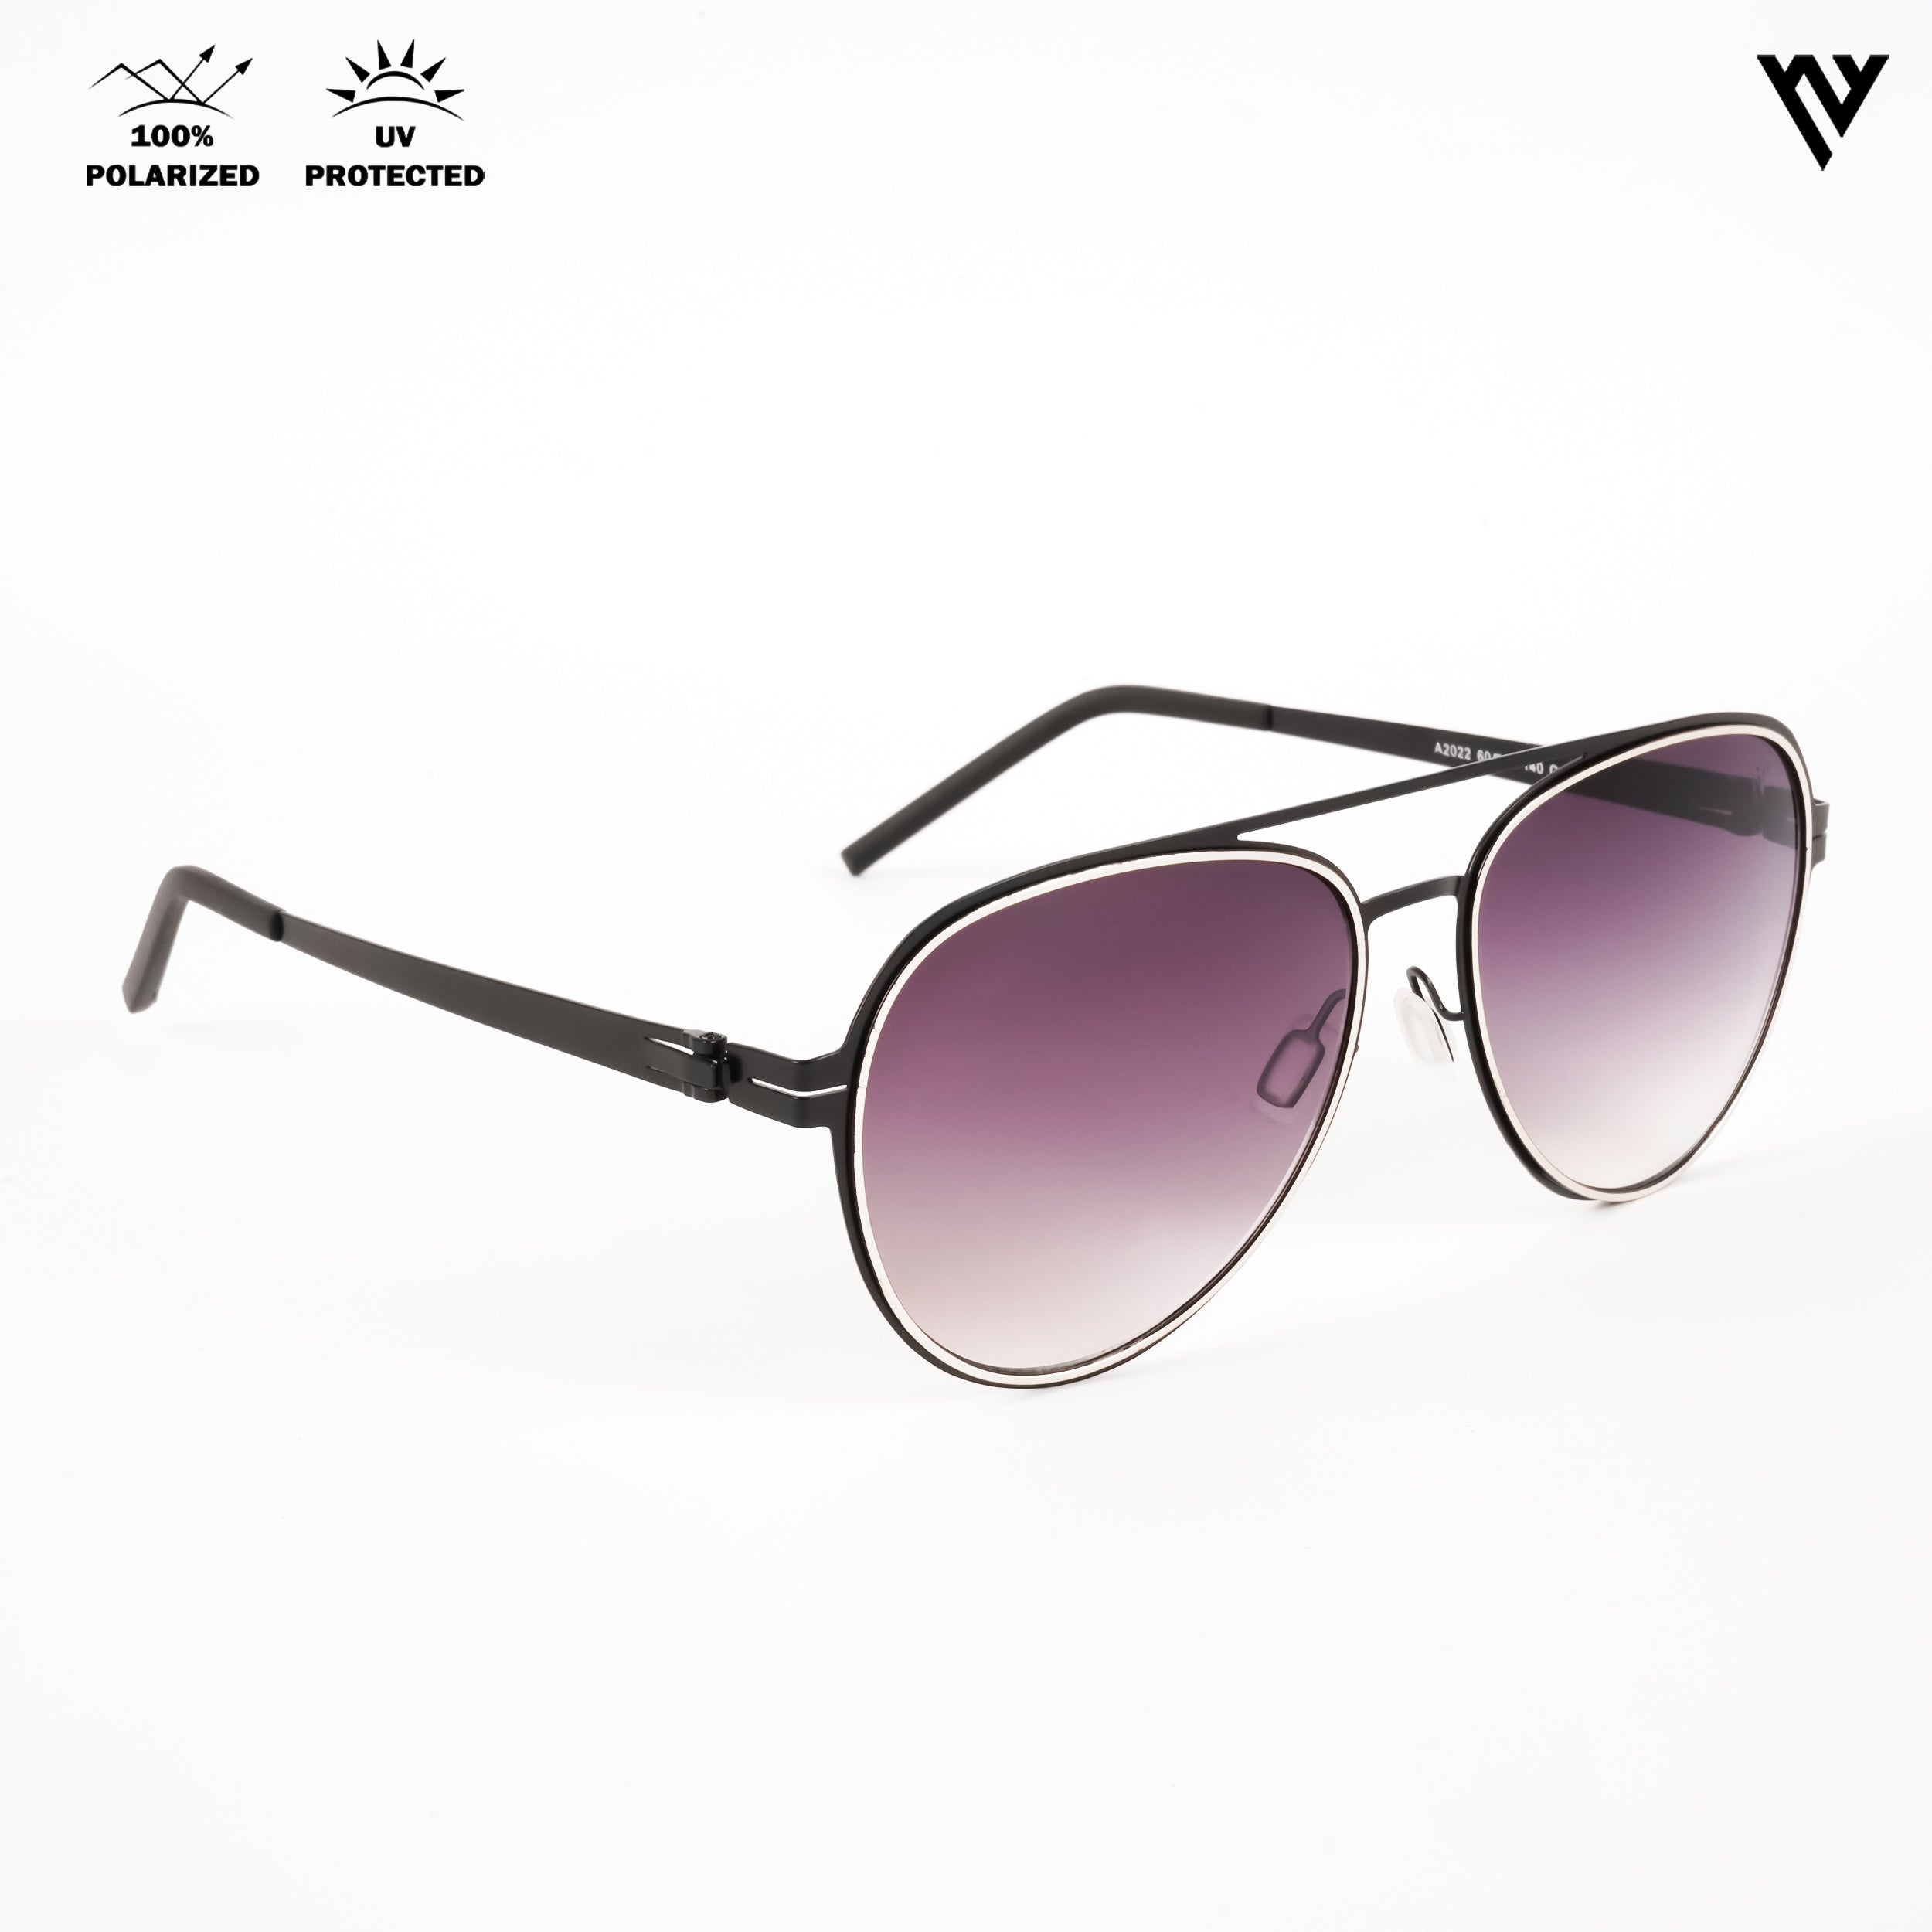 Voyage Exclusive Black & Golden Polarized Aviator Sunglasses for Men & Women (A2022MG4289)